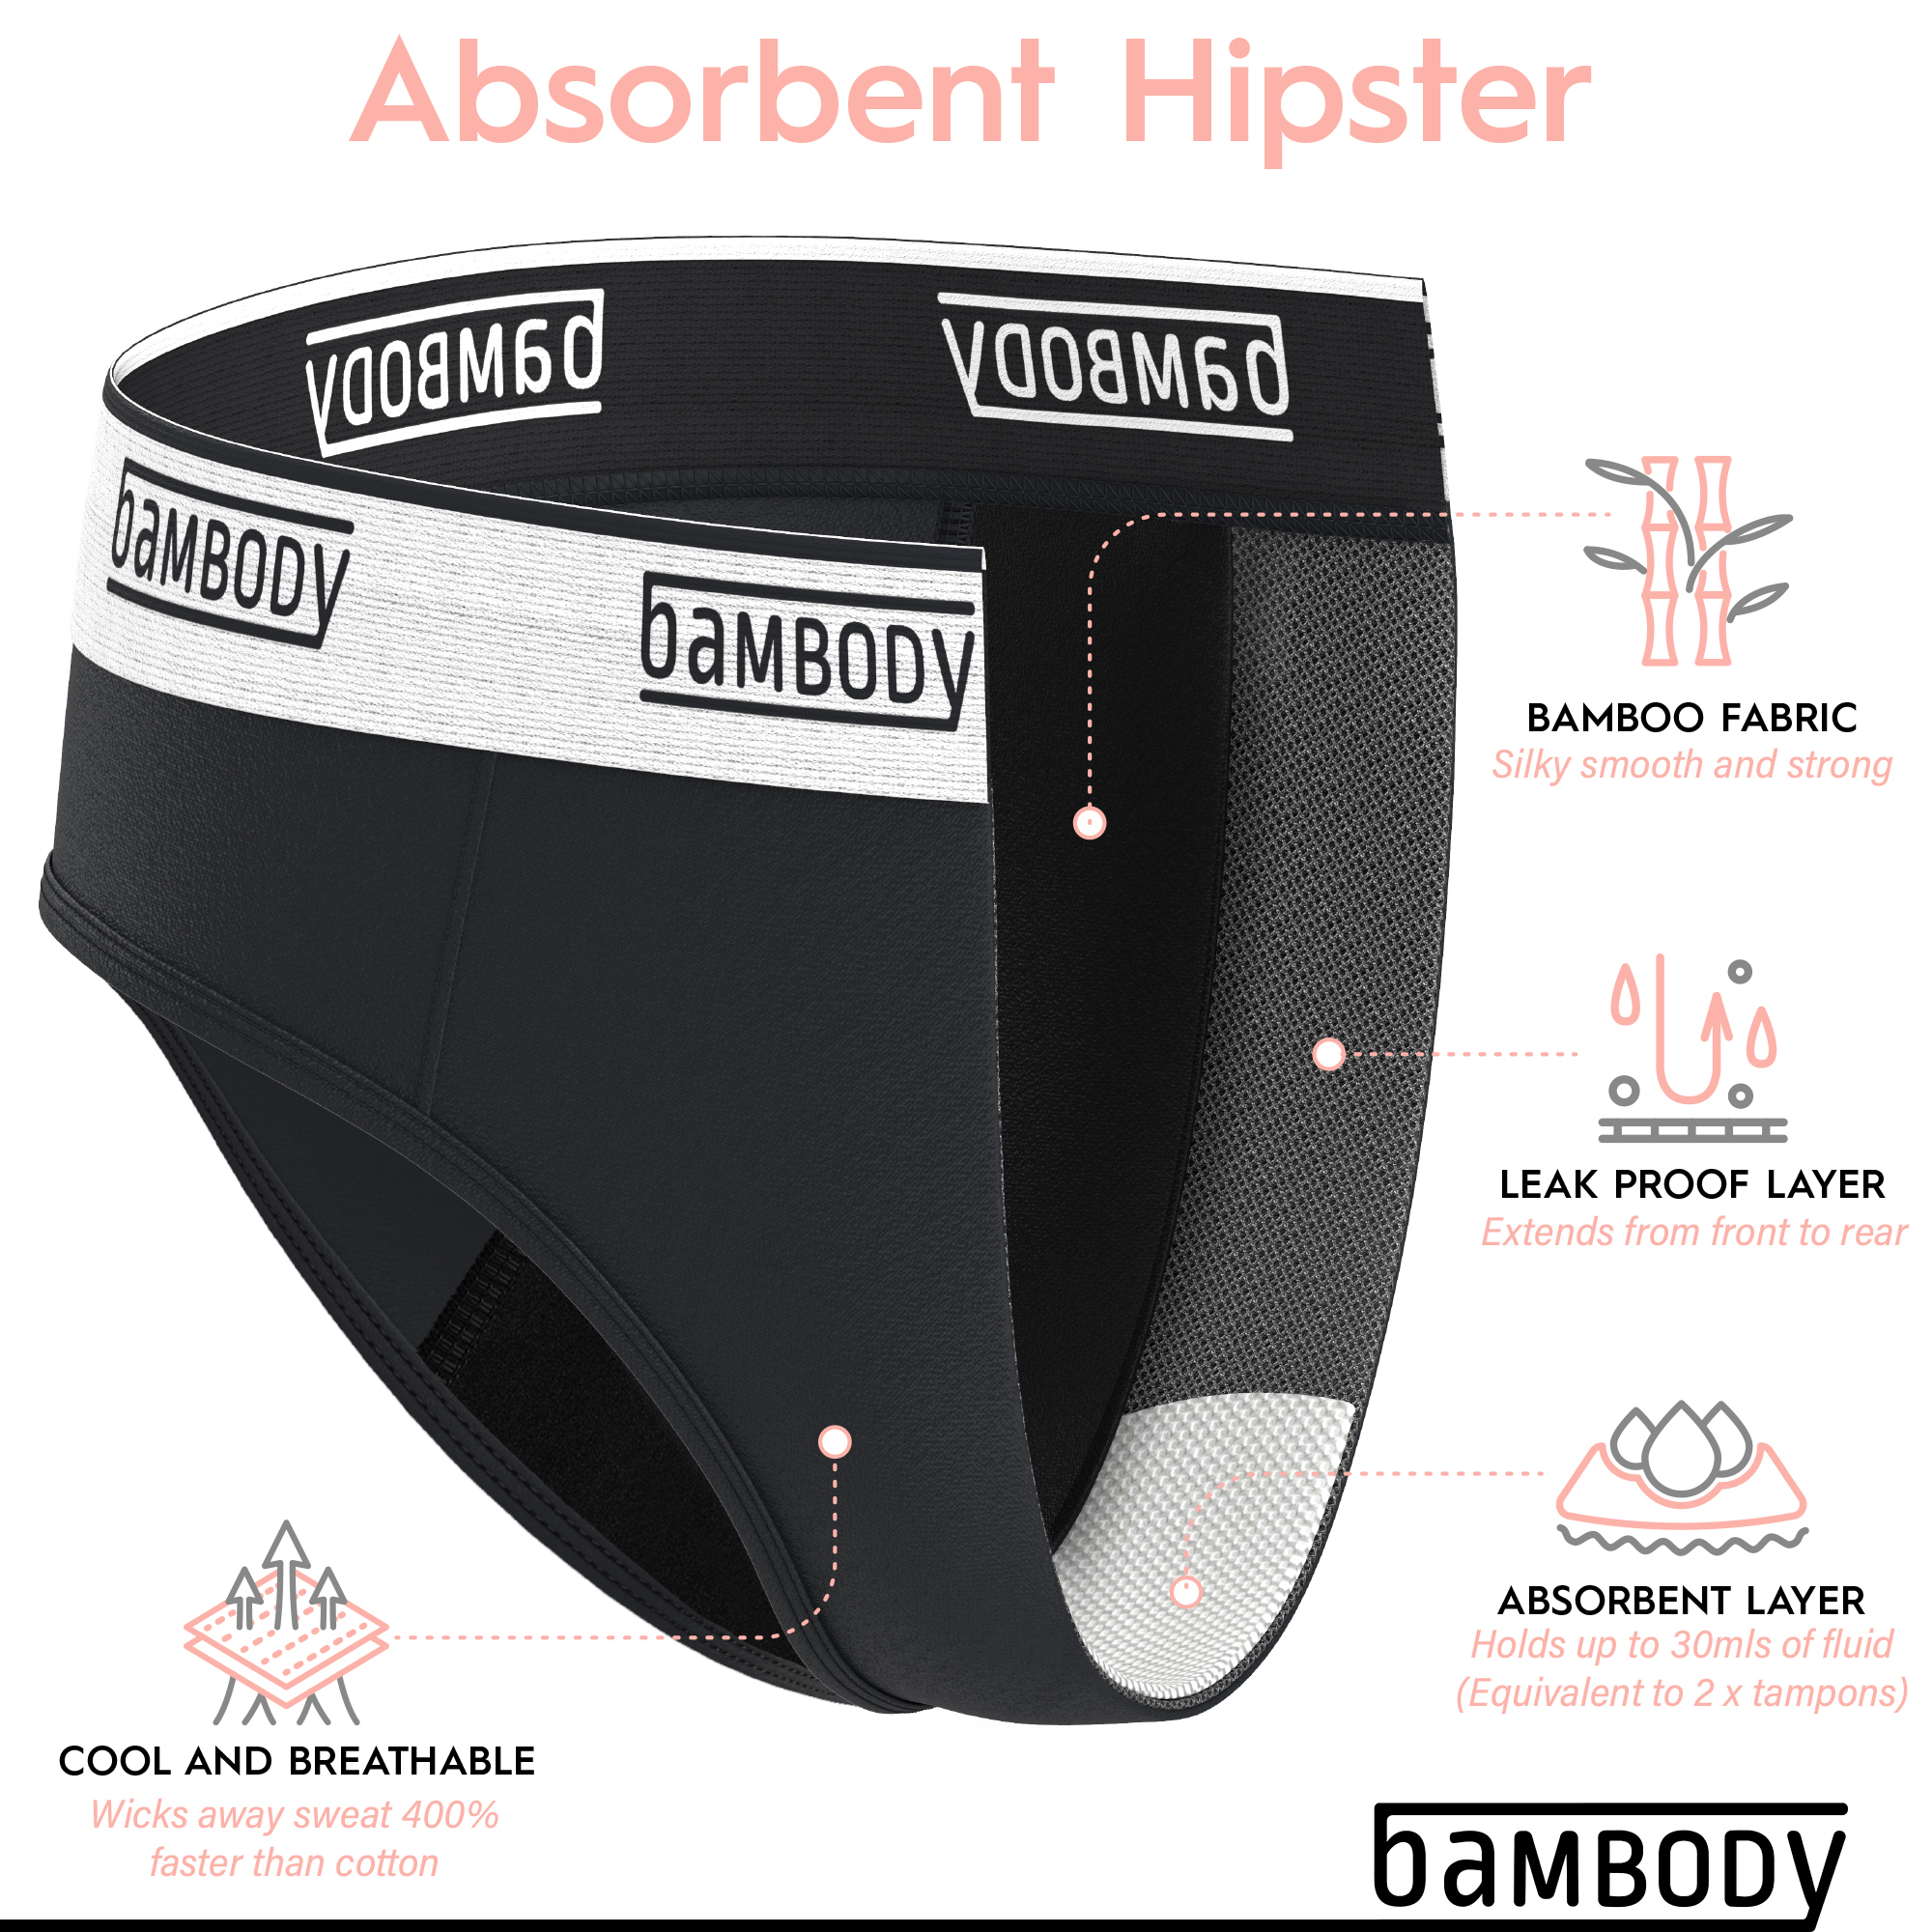 Absorbent Hipster Bambody